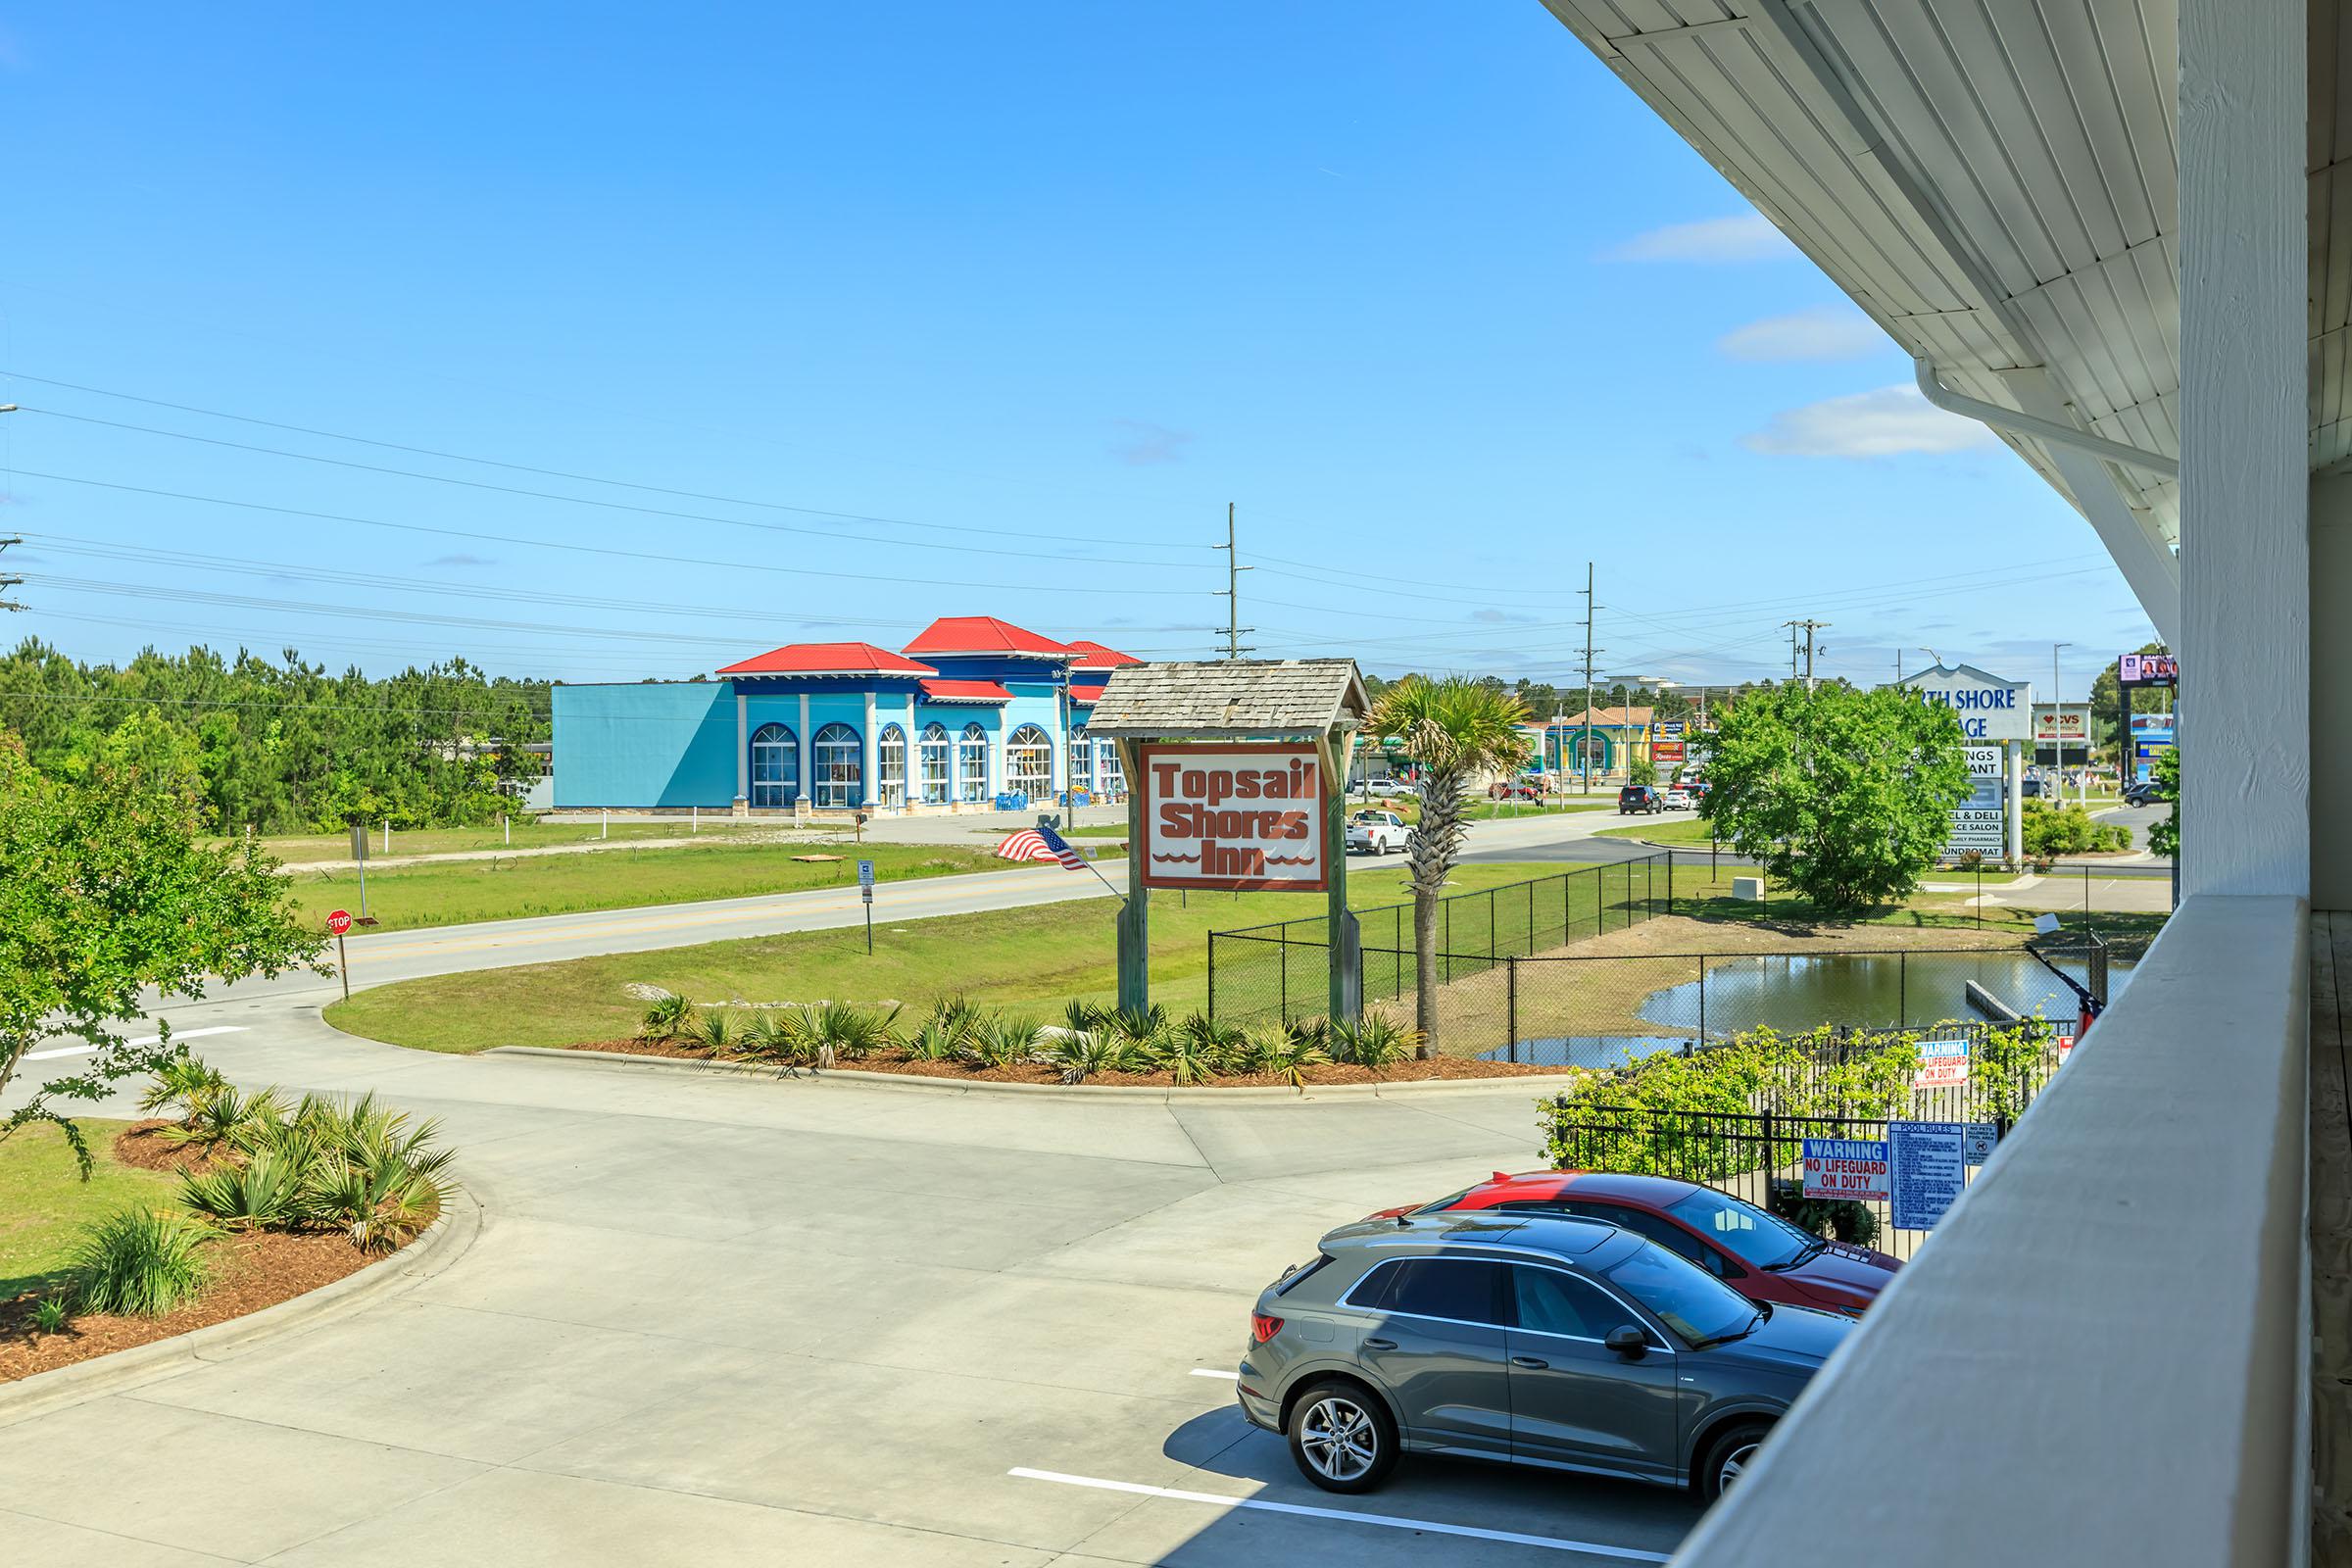 SNEADS FERRY, NC HOTEL ROOMS FOR RENT AT TOPSAIL SHORES INN